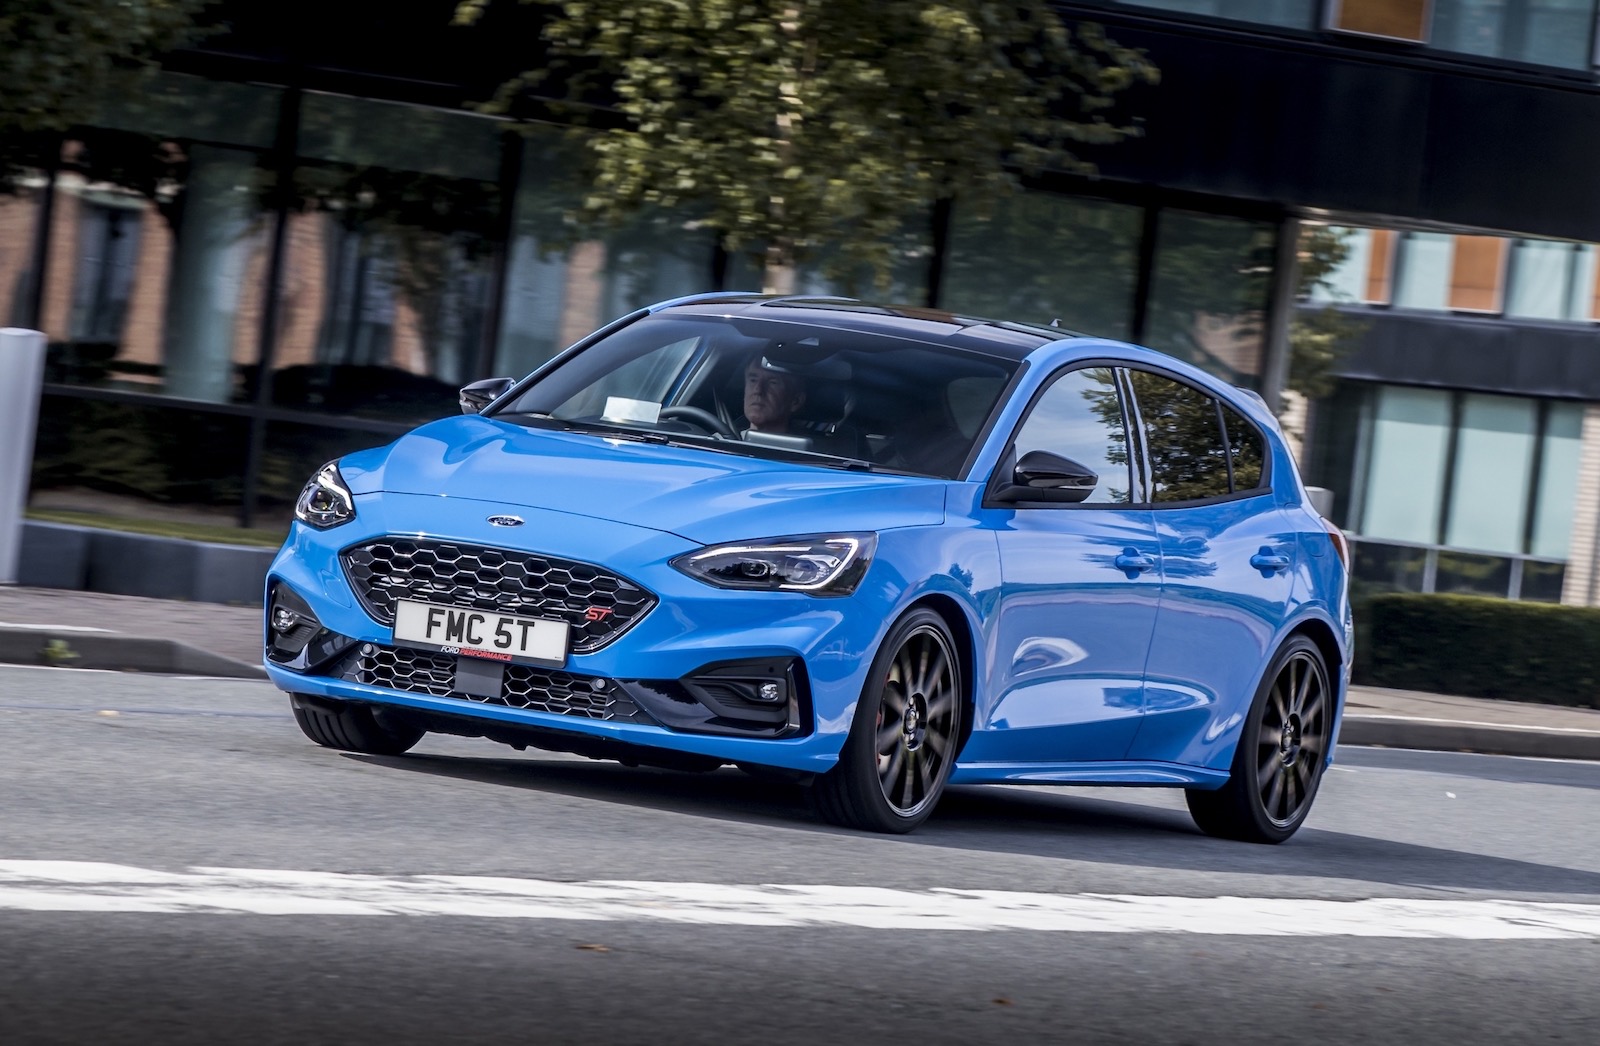 Hardcore Ford Focus ST ‘Edition’ edition announced in Europe